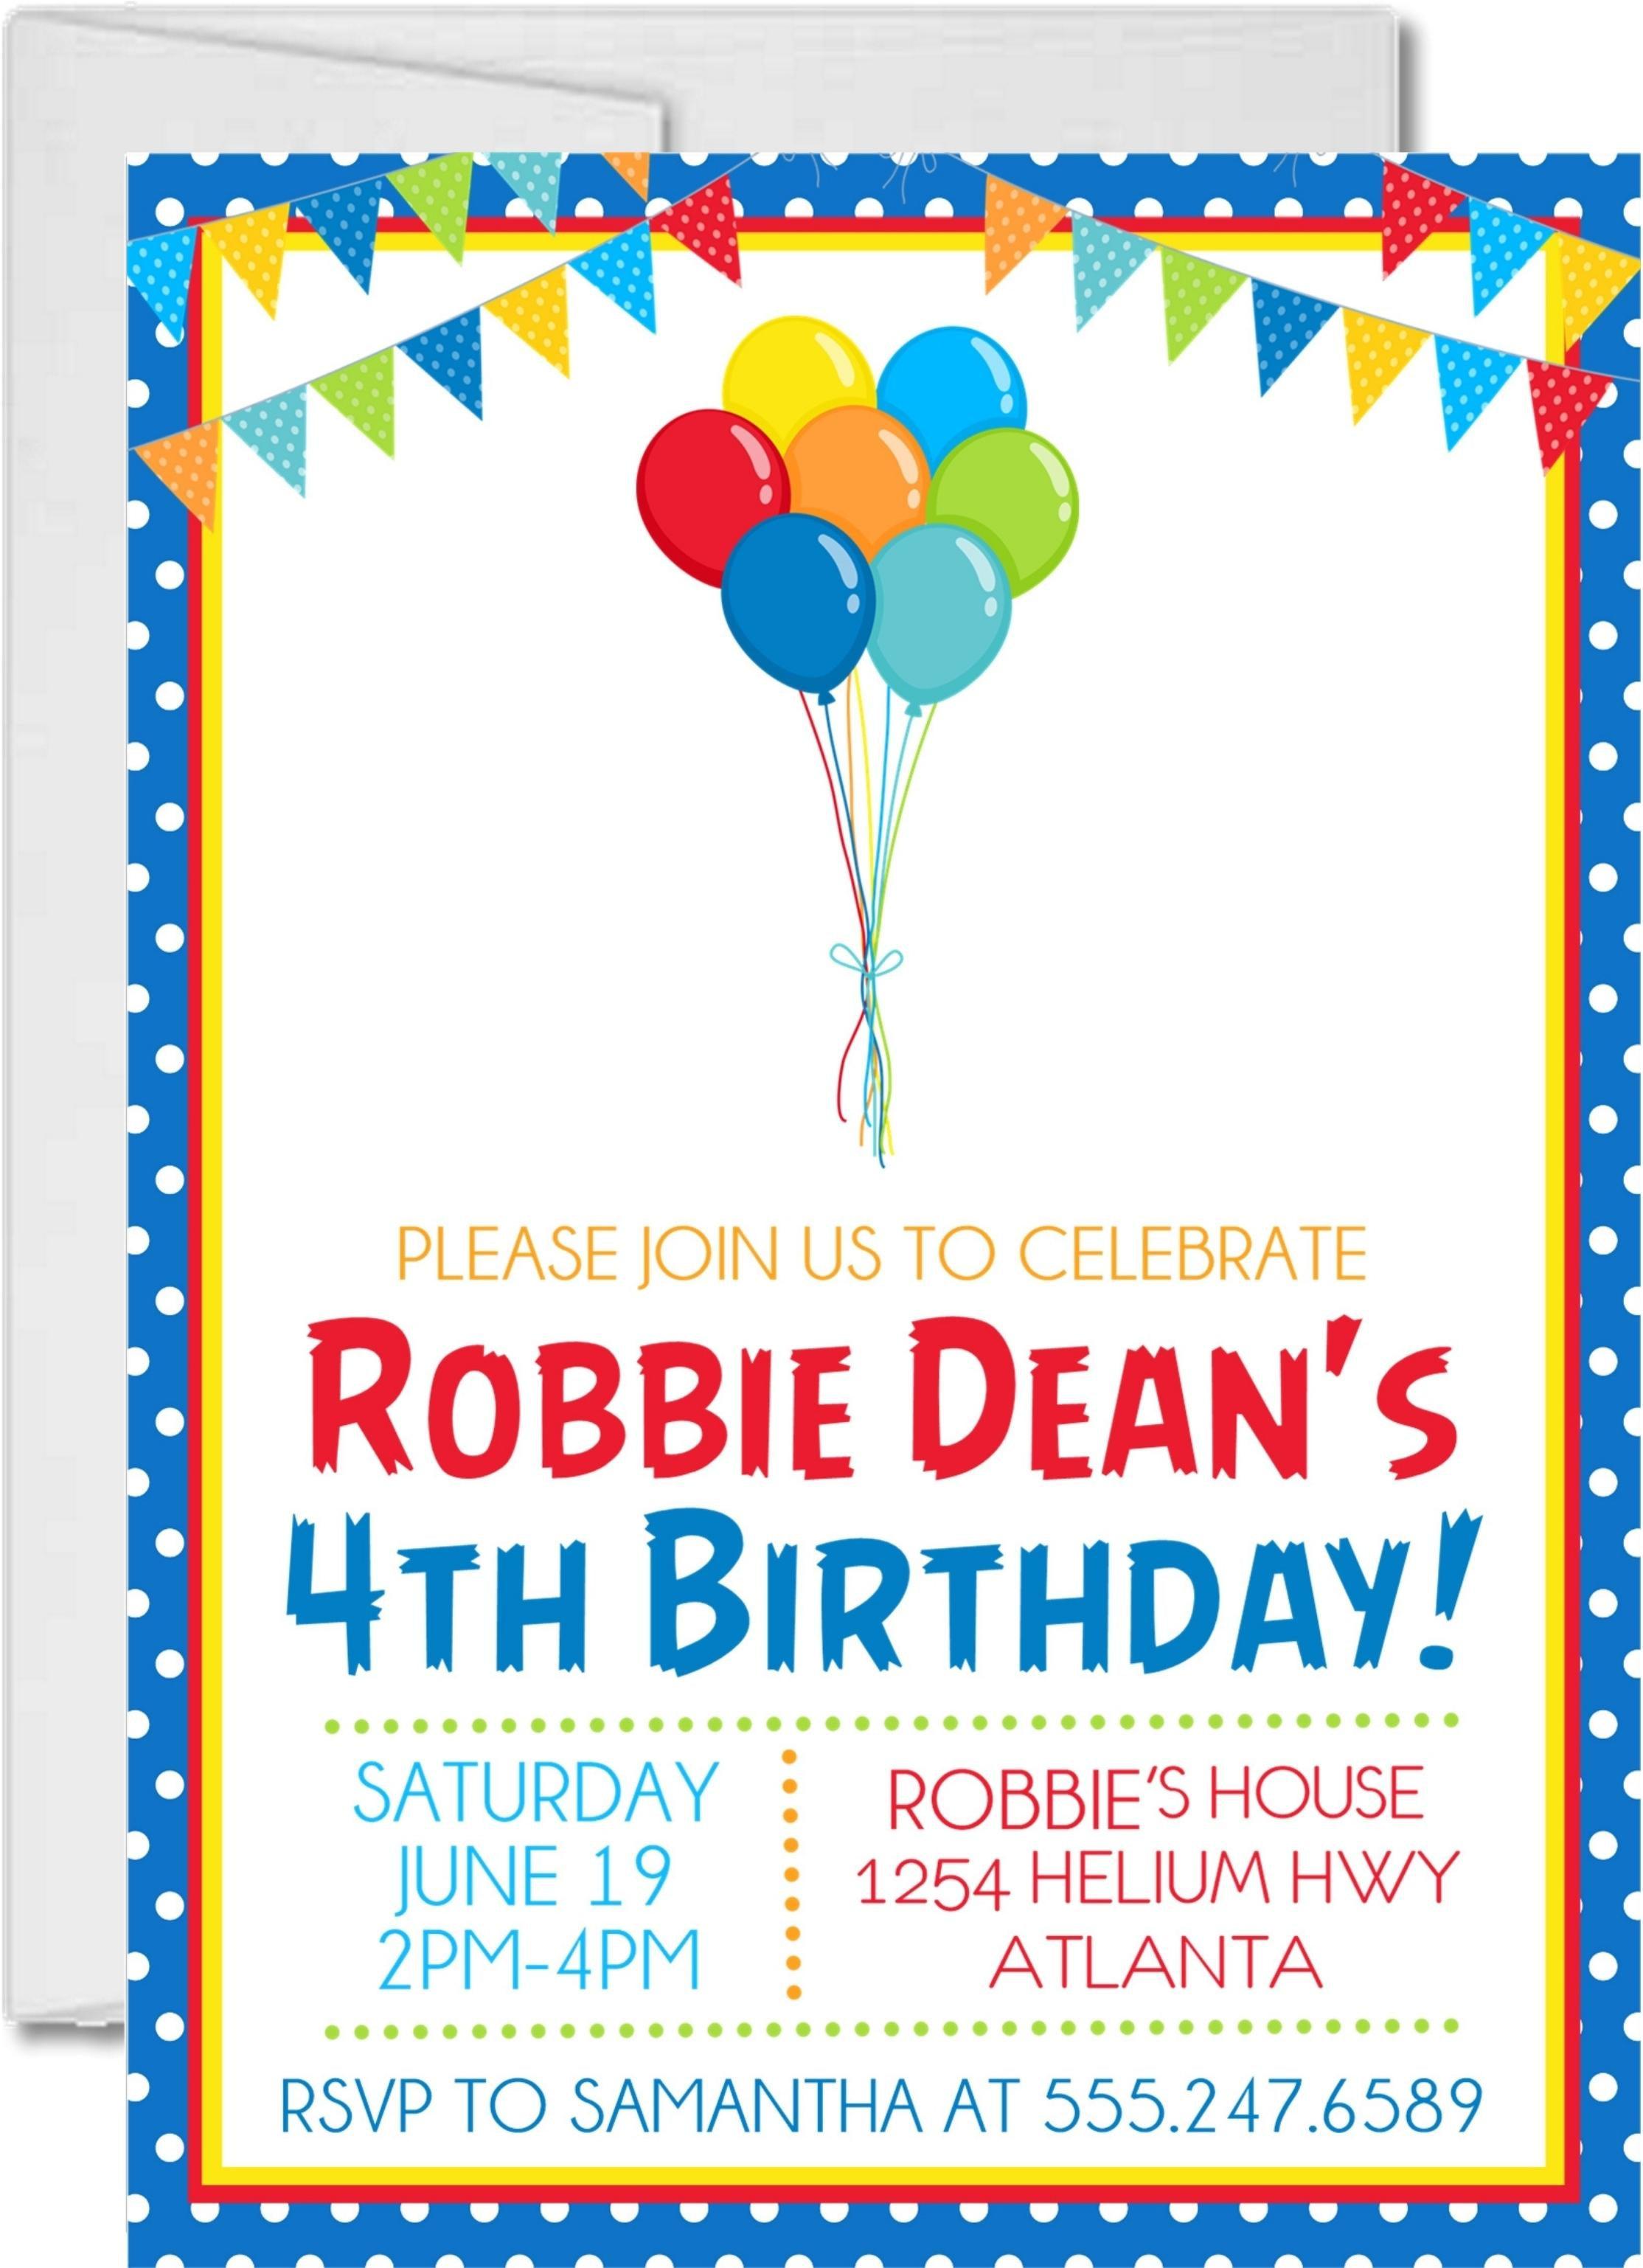 Printed Party Birthday Party Invitations, 20 Invitations And Envelopes, Rainbow Party Invites, Ideas, And Supplies